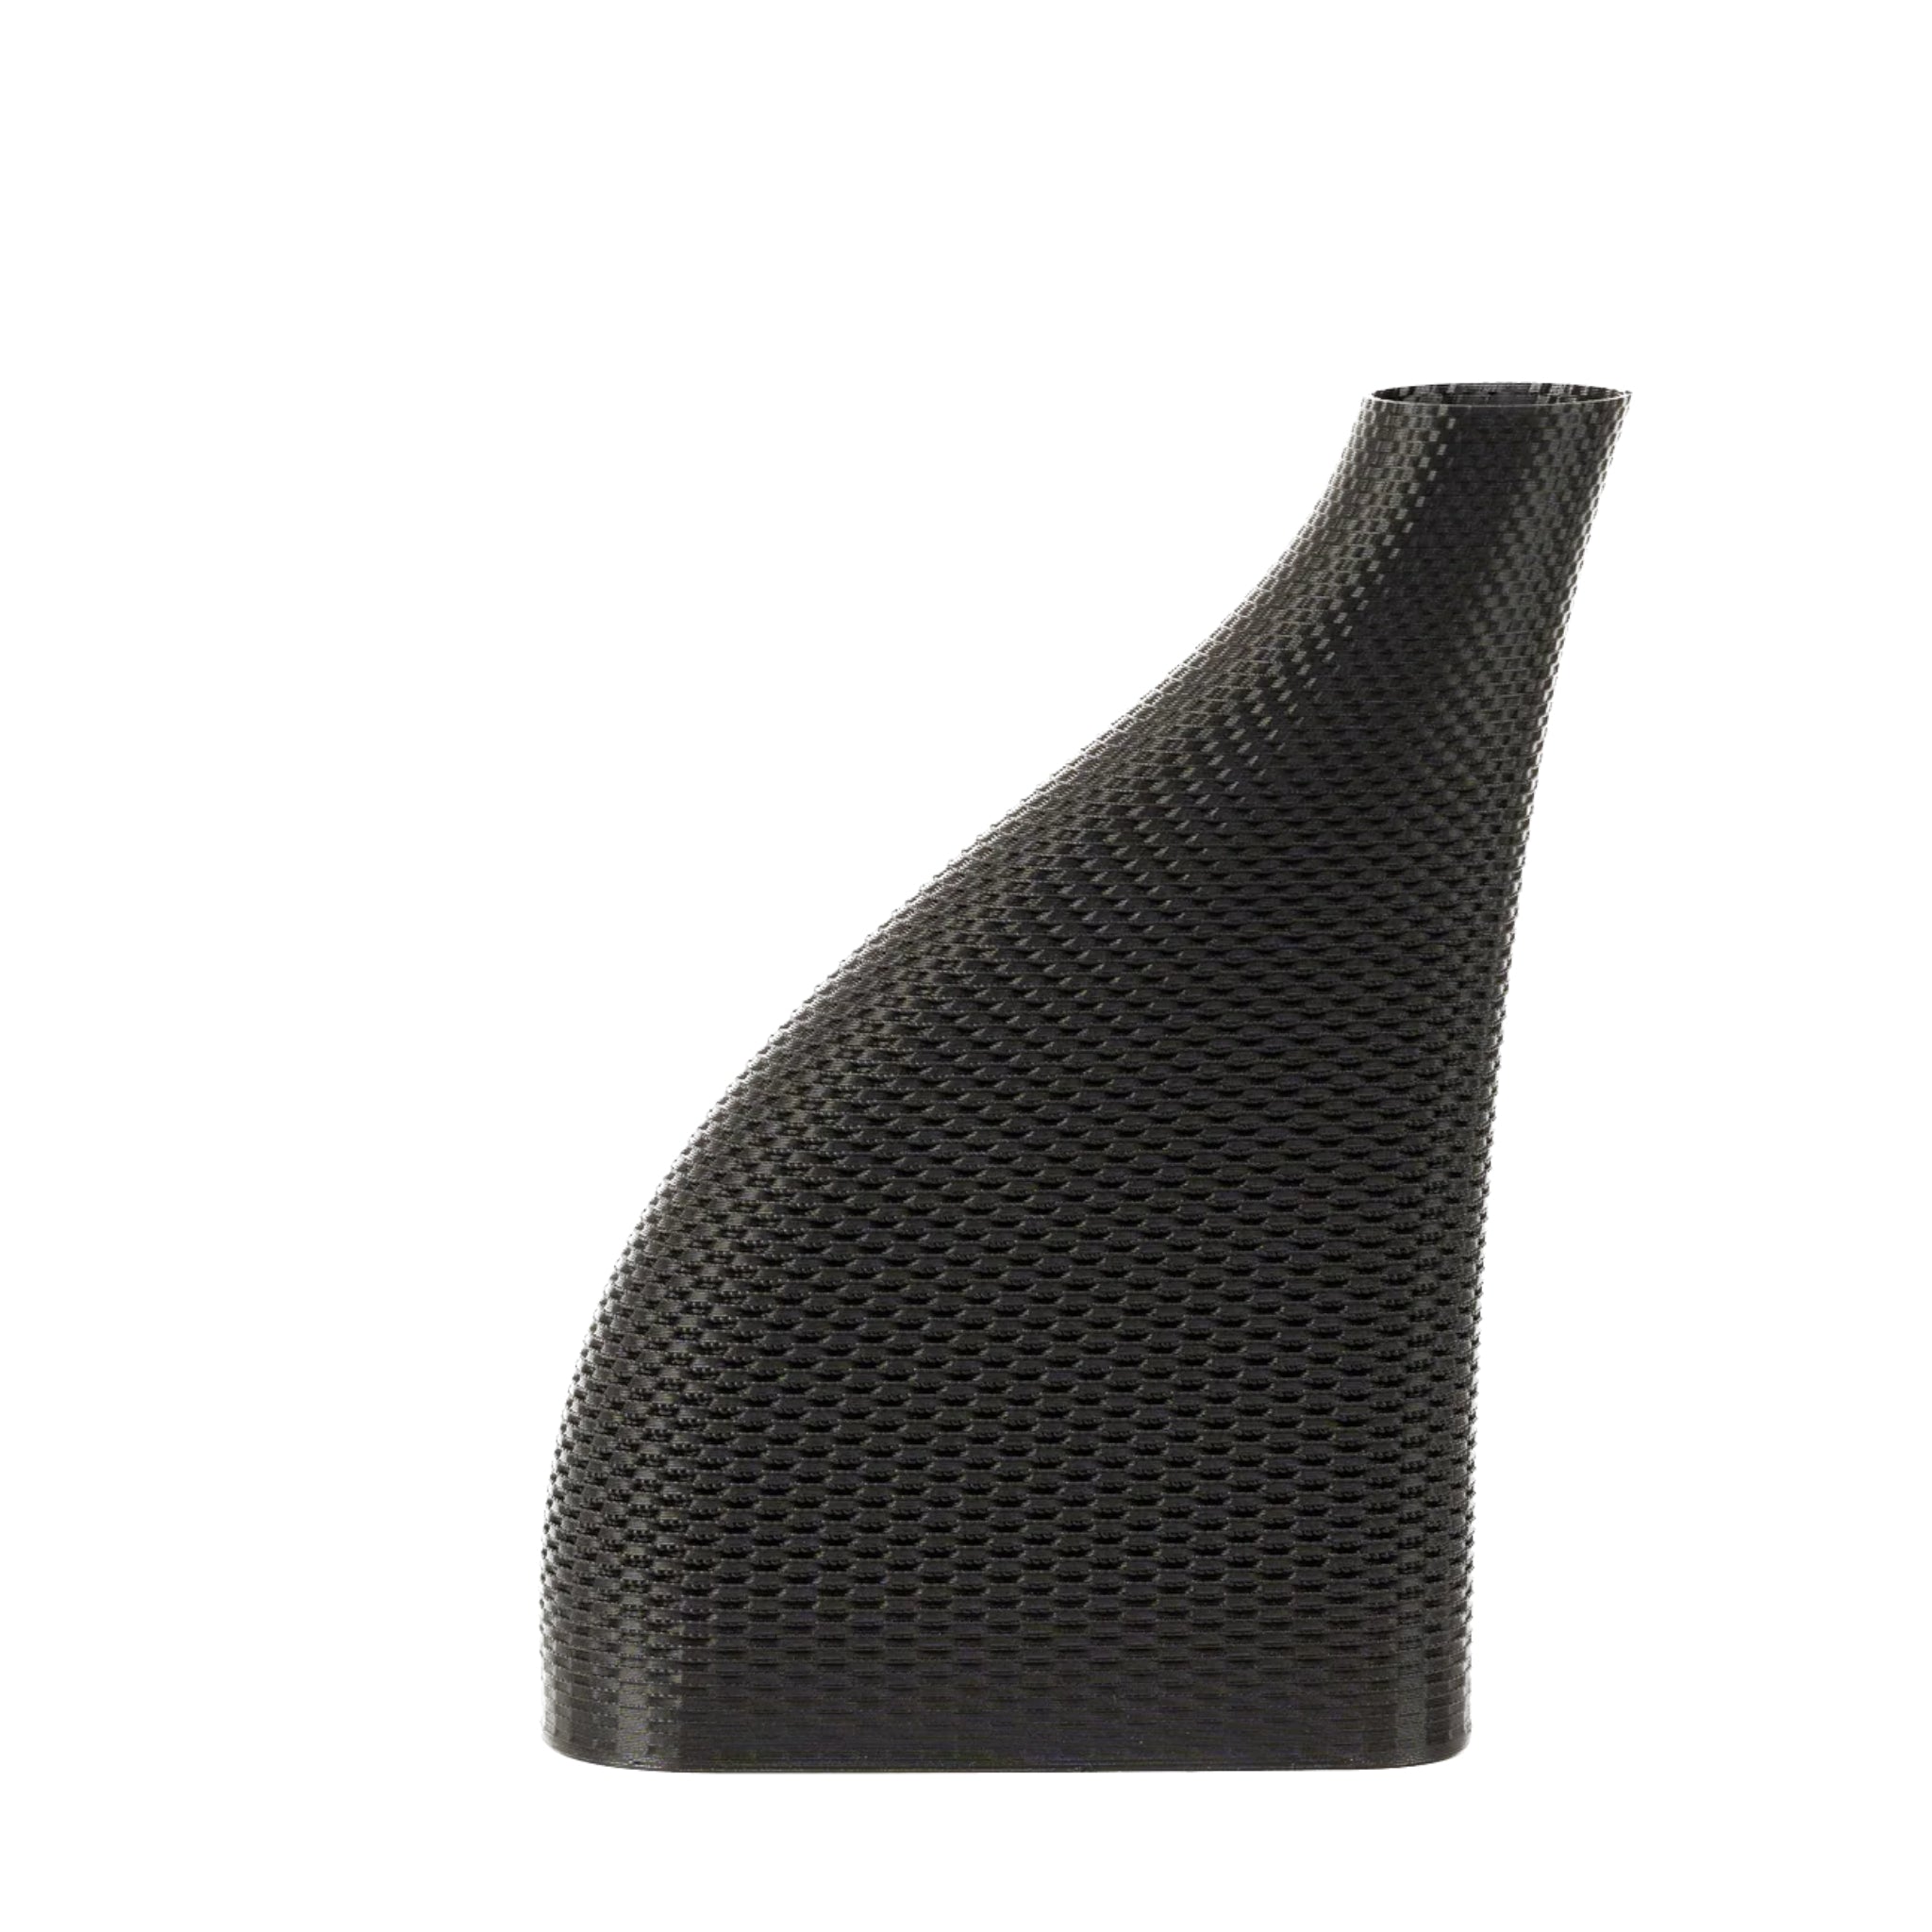 Cyrc wicker vase in black. 3D printed recycled plastic. Product placed in front of a white background